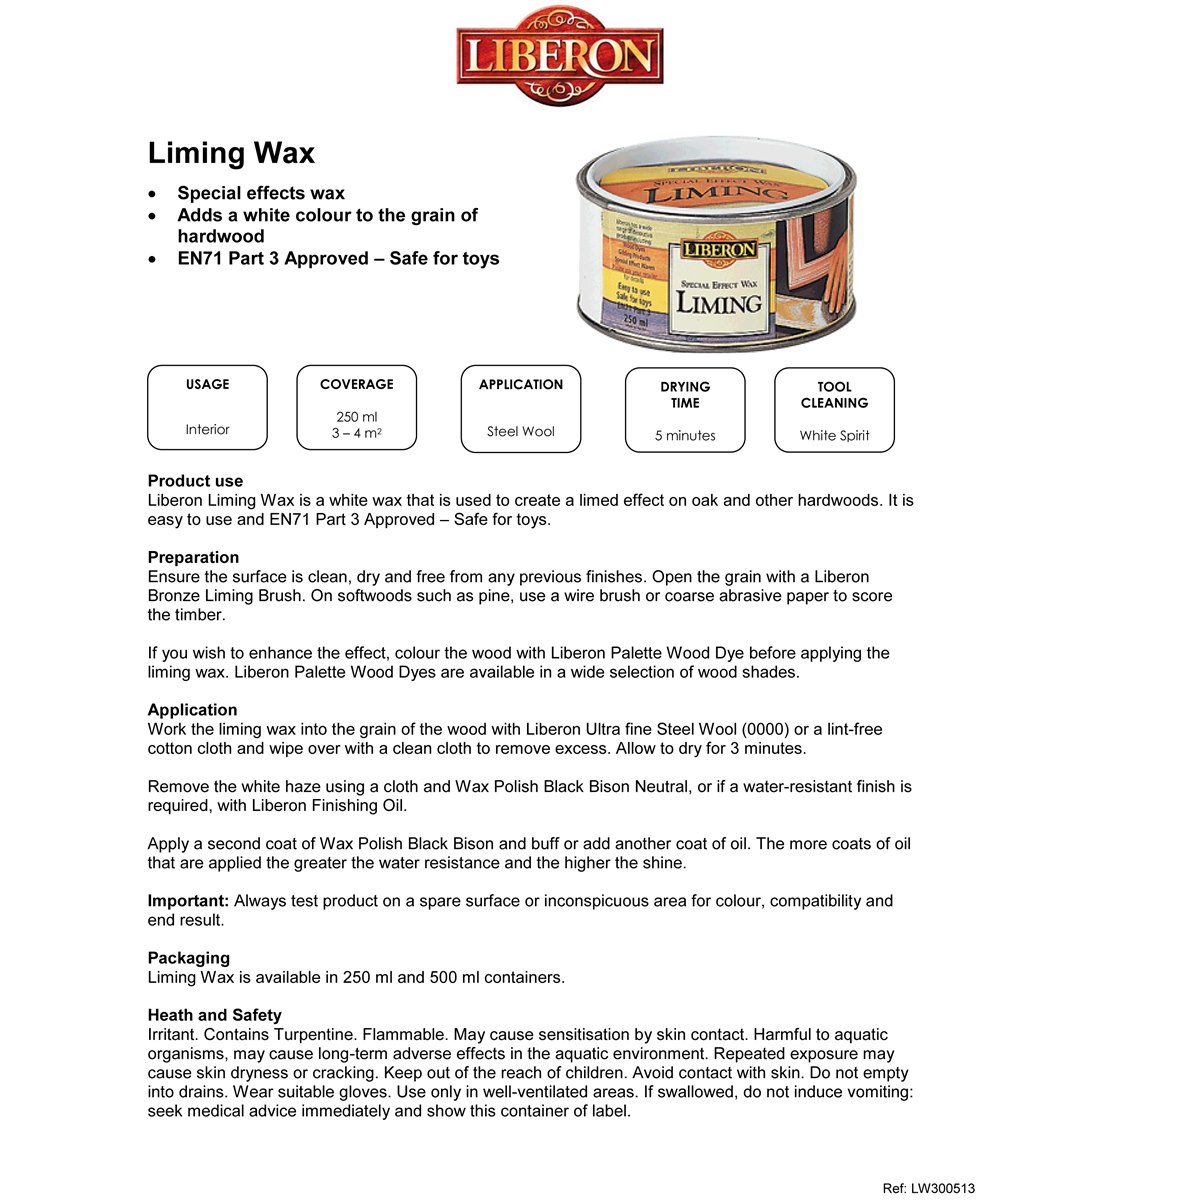 Liberon Special Effects Liming Wax Usage Instructions